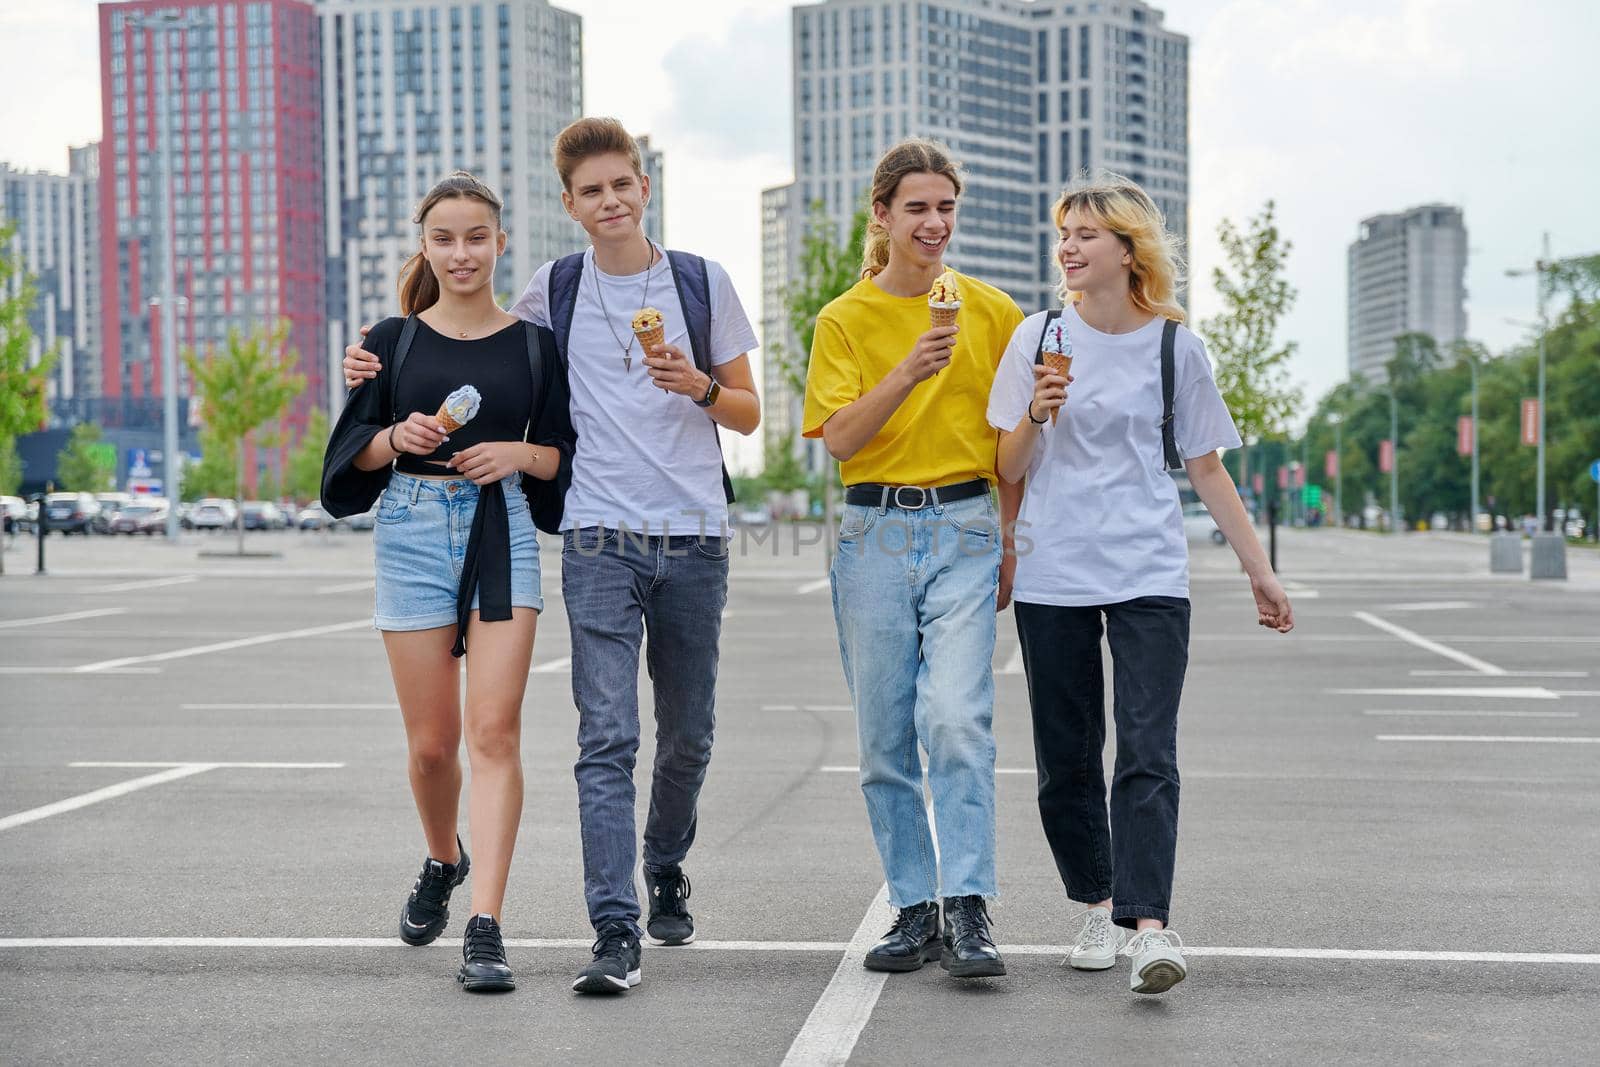 Group portrait of happy teenagers walking together with ice cream. Four smiling young people in city, lifestyle, friendship, adolescence, urban style, summer, leisure, youth concept